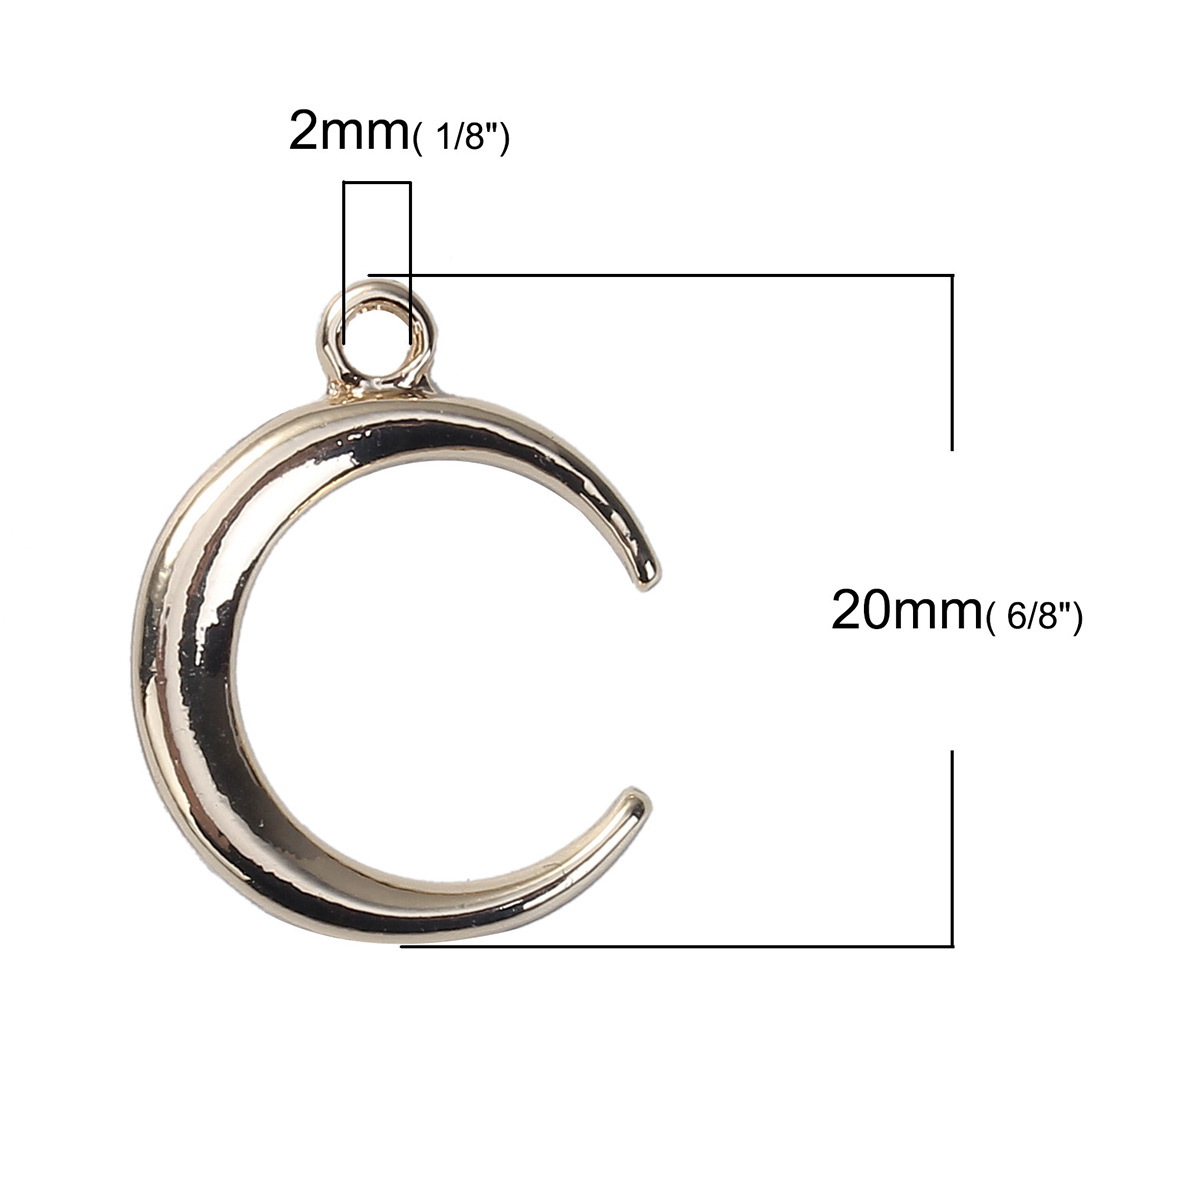 Picture of Zinc Based Alloy Charms Crescent Moon Double Horn Gold Plated 20mm( 6/8") x 16mm( 5/8"), 5 PCs